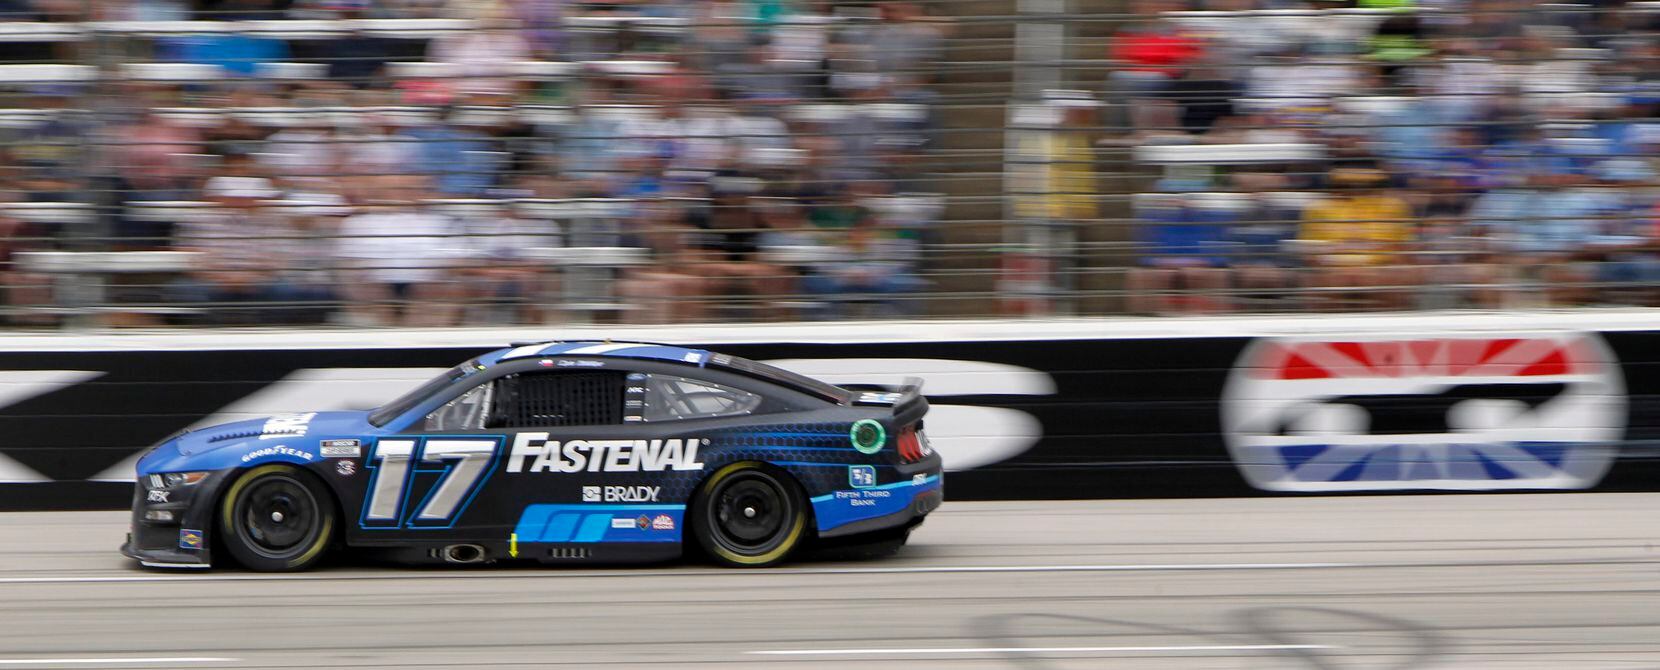 Driver Chris Buescher speeds his way around the track in the #17 Fastenal Ford car during...